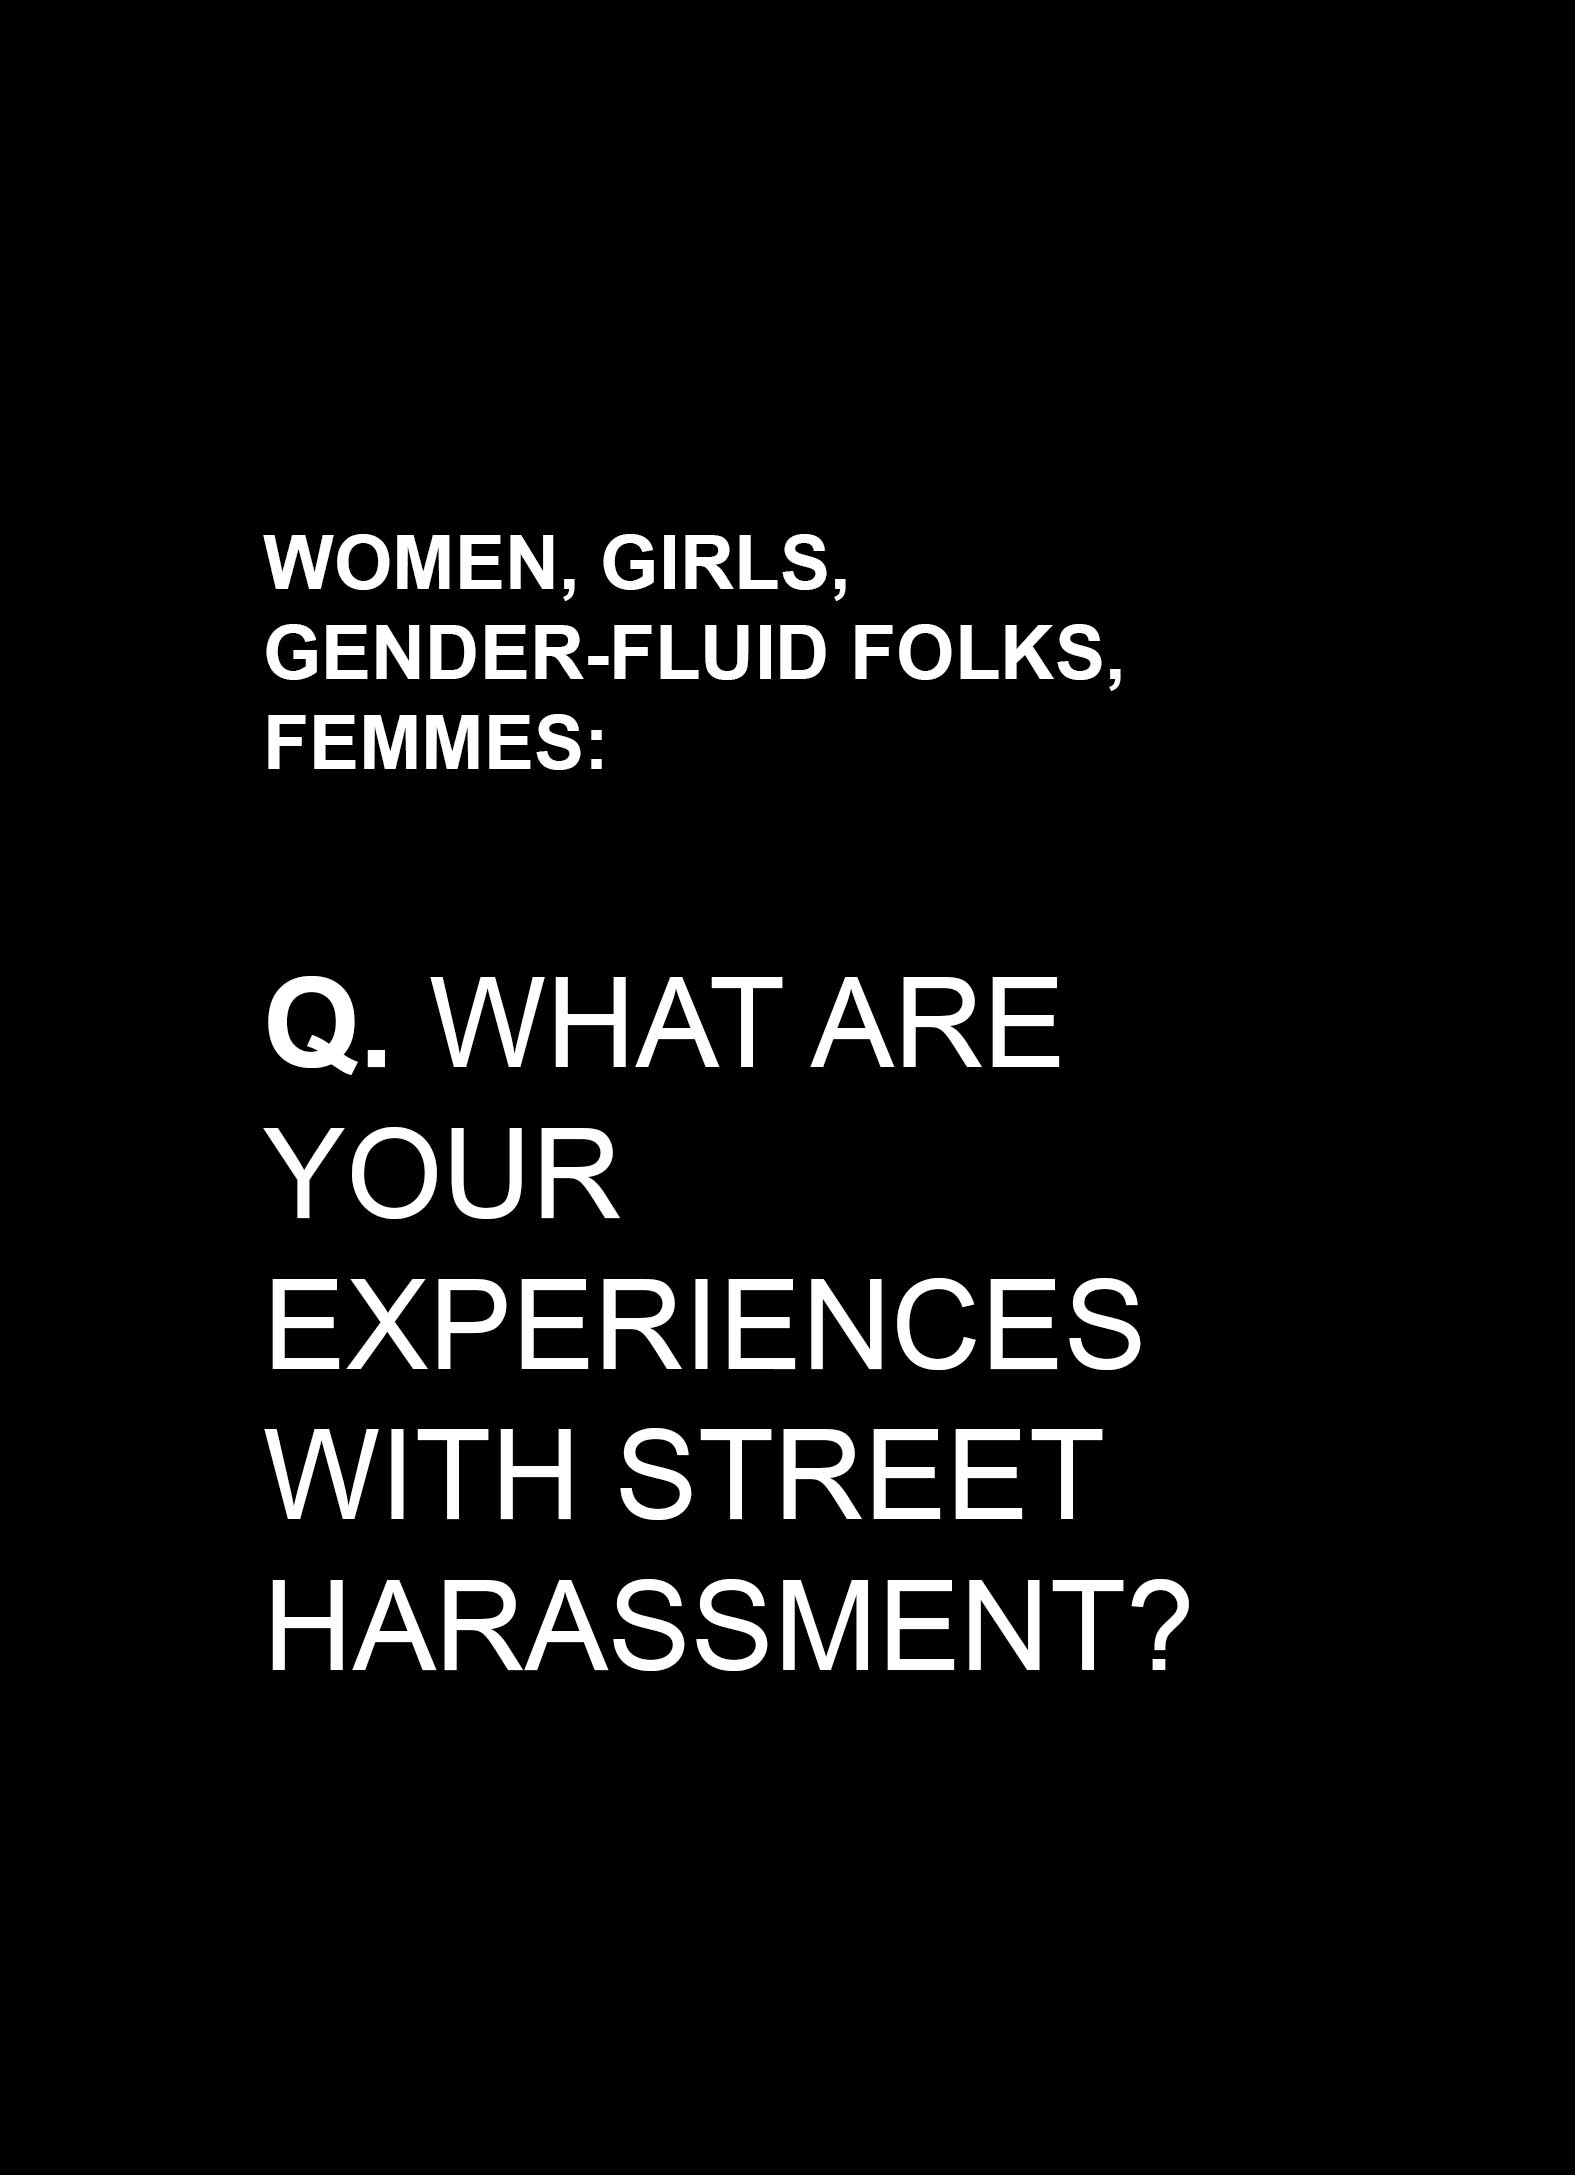 Women, girls, gender-fluid folks, femmes: Q. What are your experiences with street harassment?